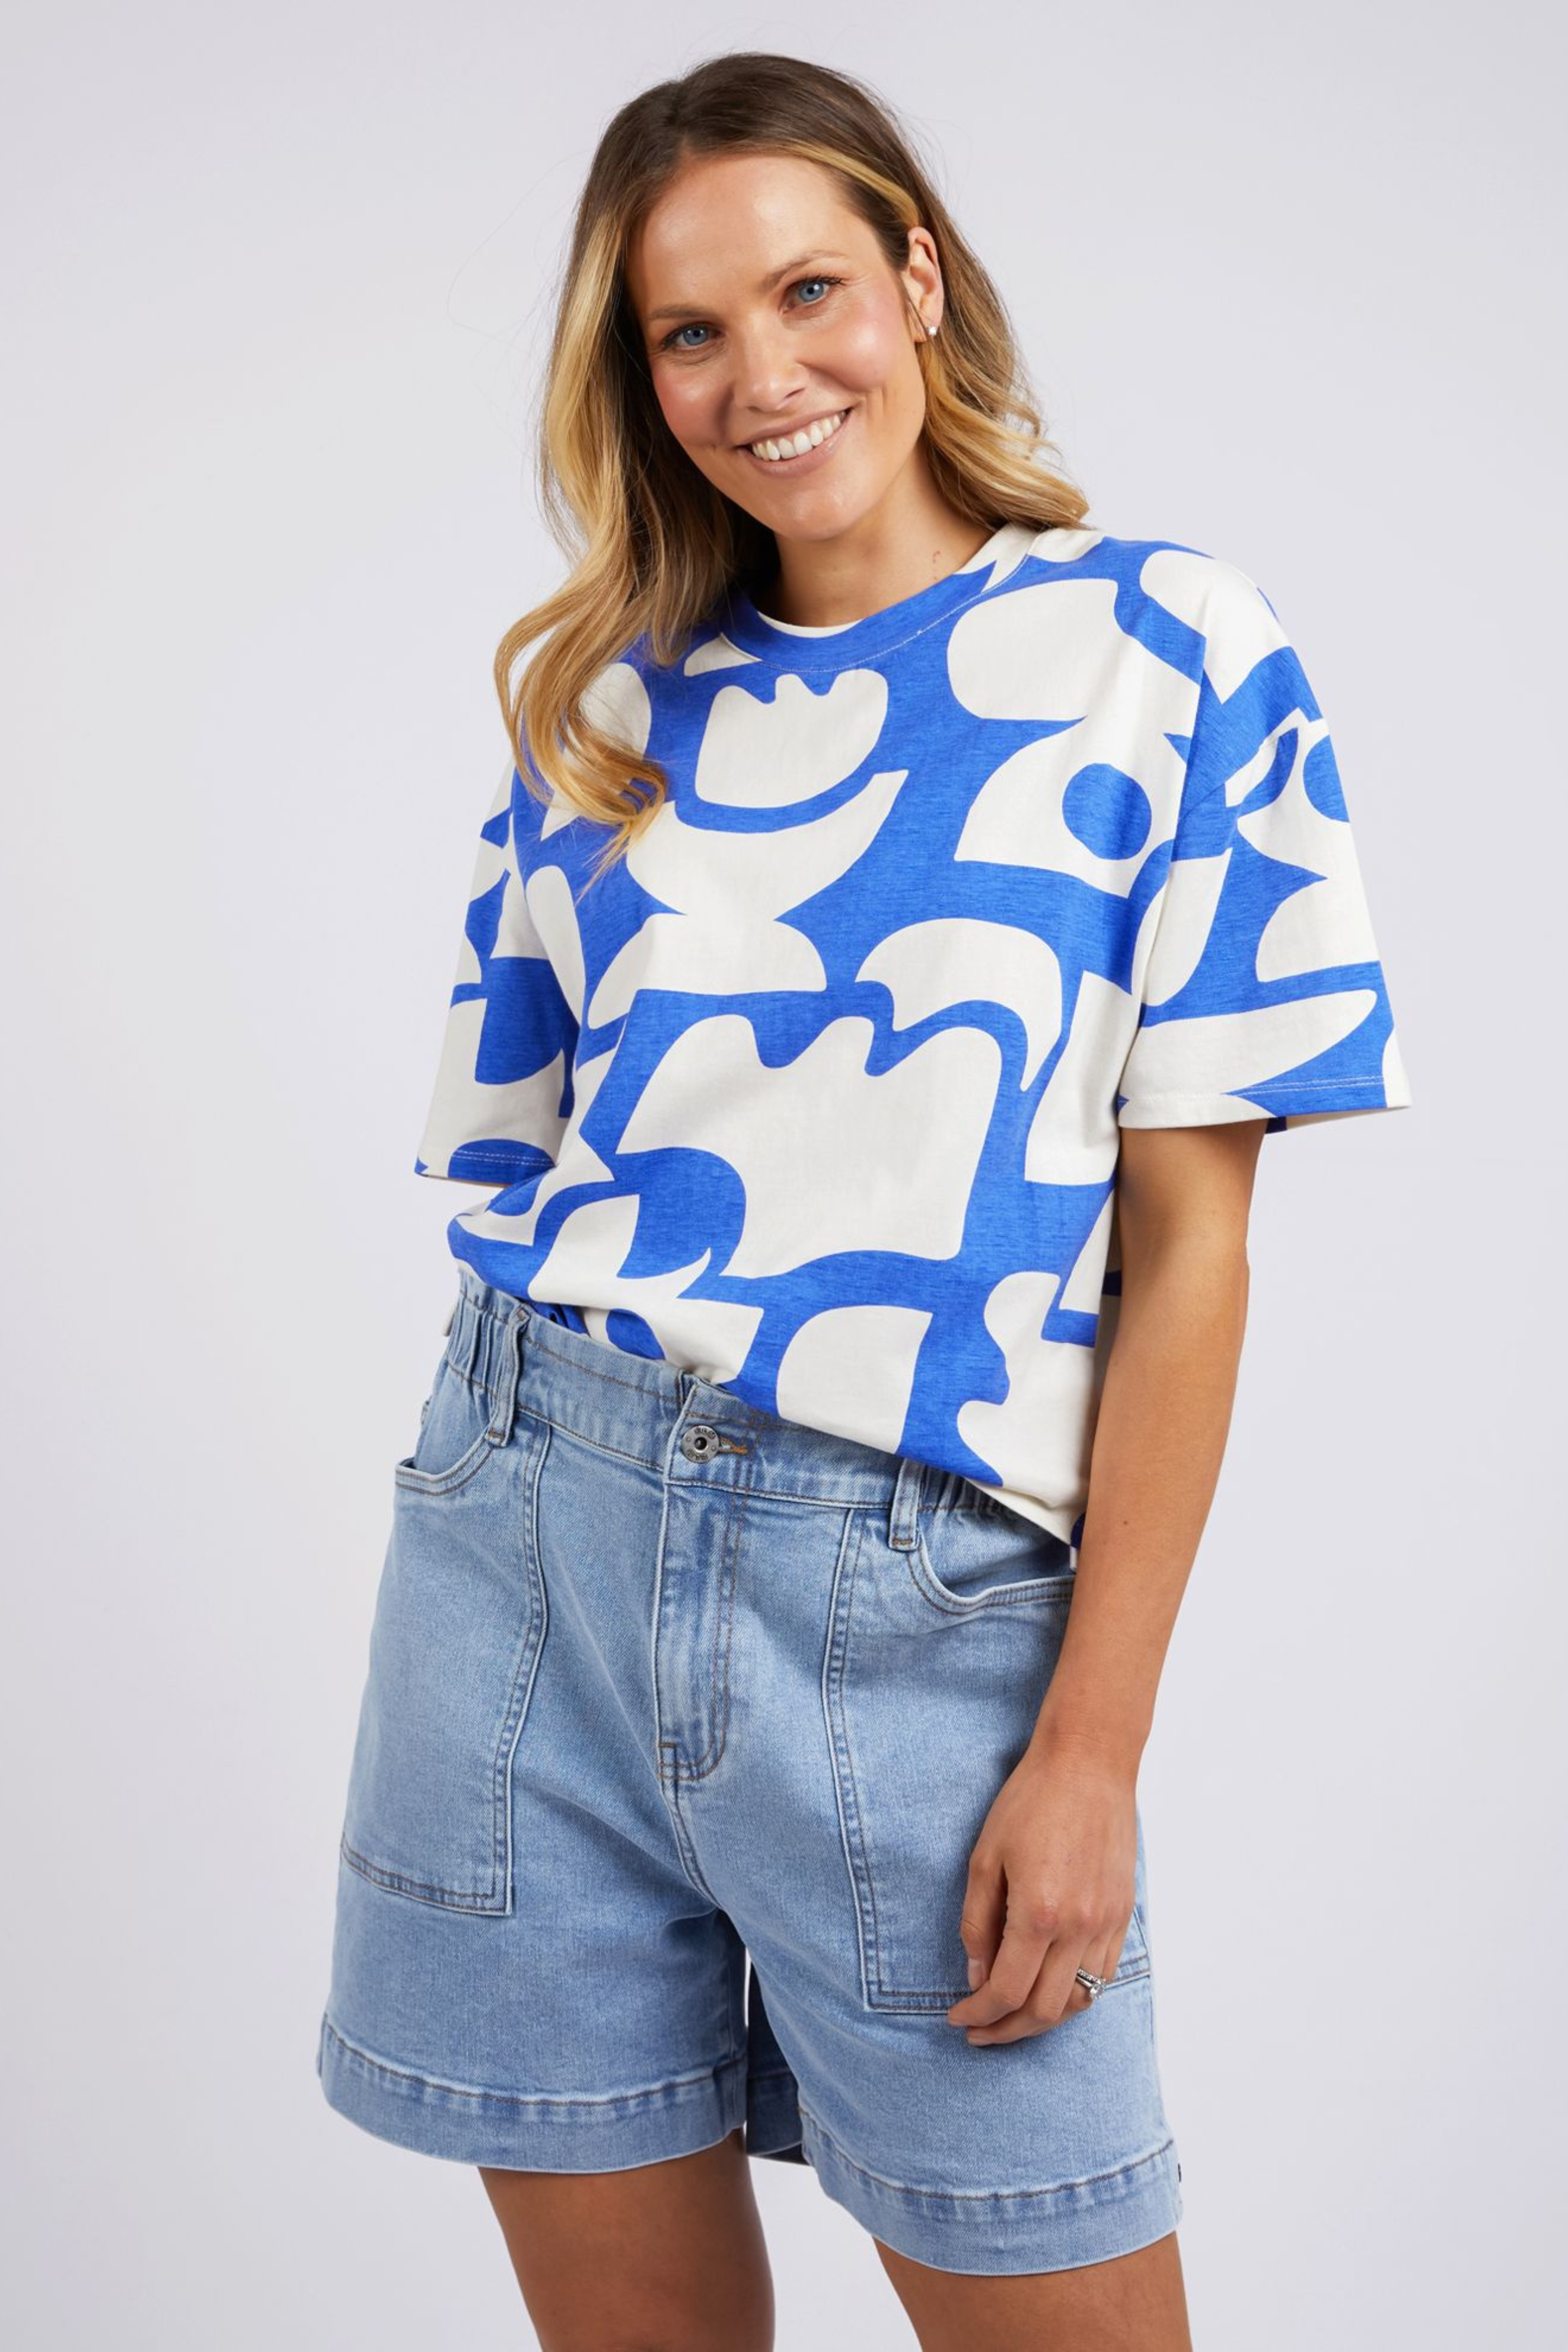 Miro Tee in Blue and White